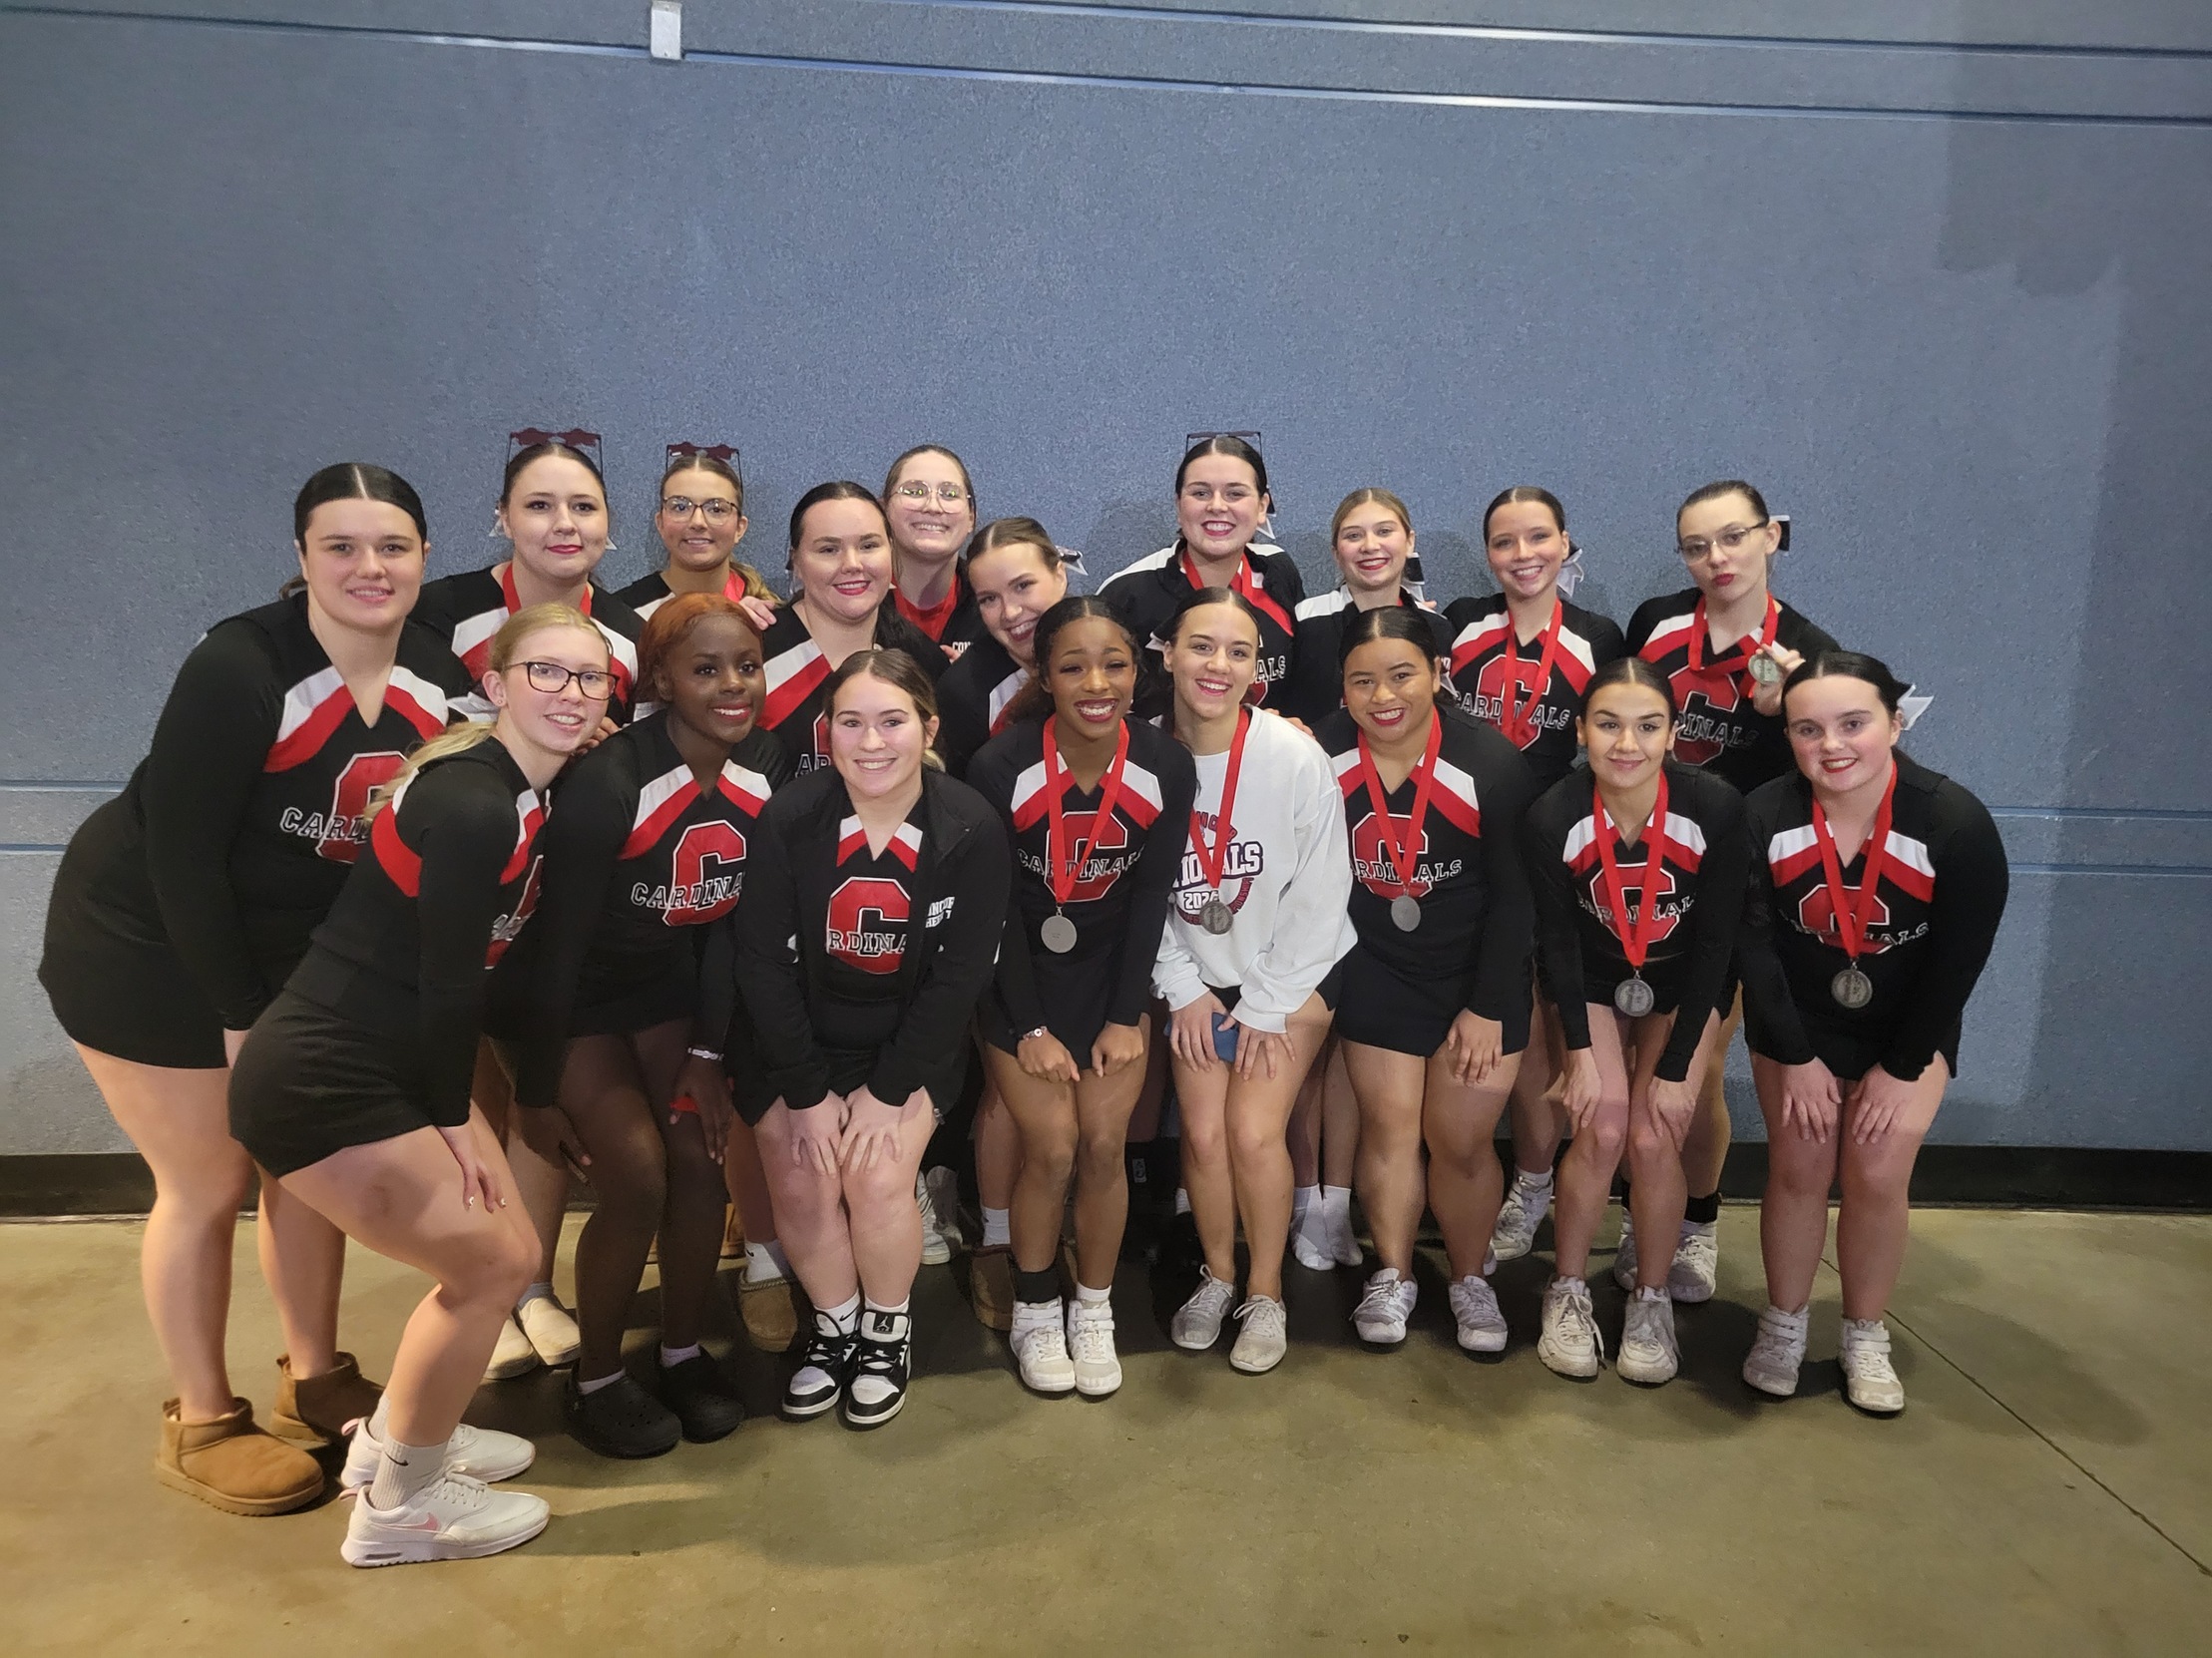 All-Girl Lands in 2nd Place at the Christian Cheerleaders of America Association College Championship